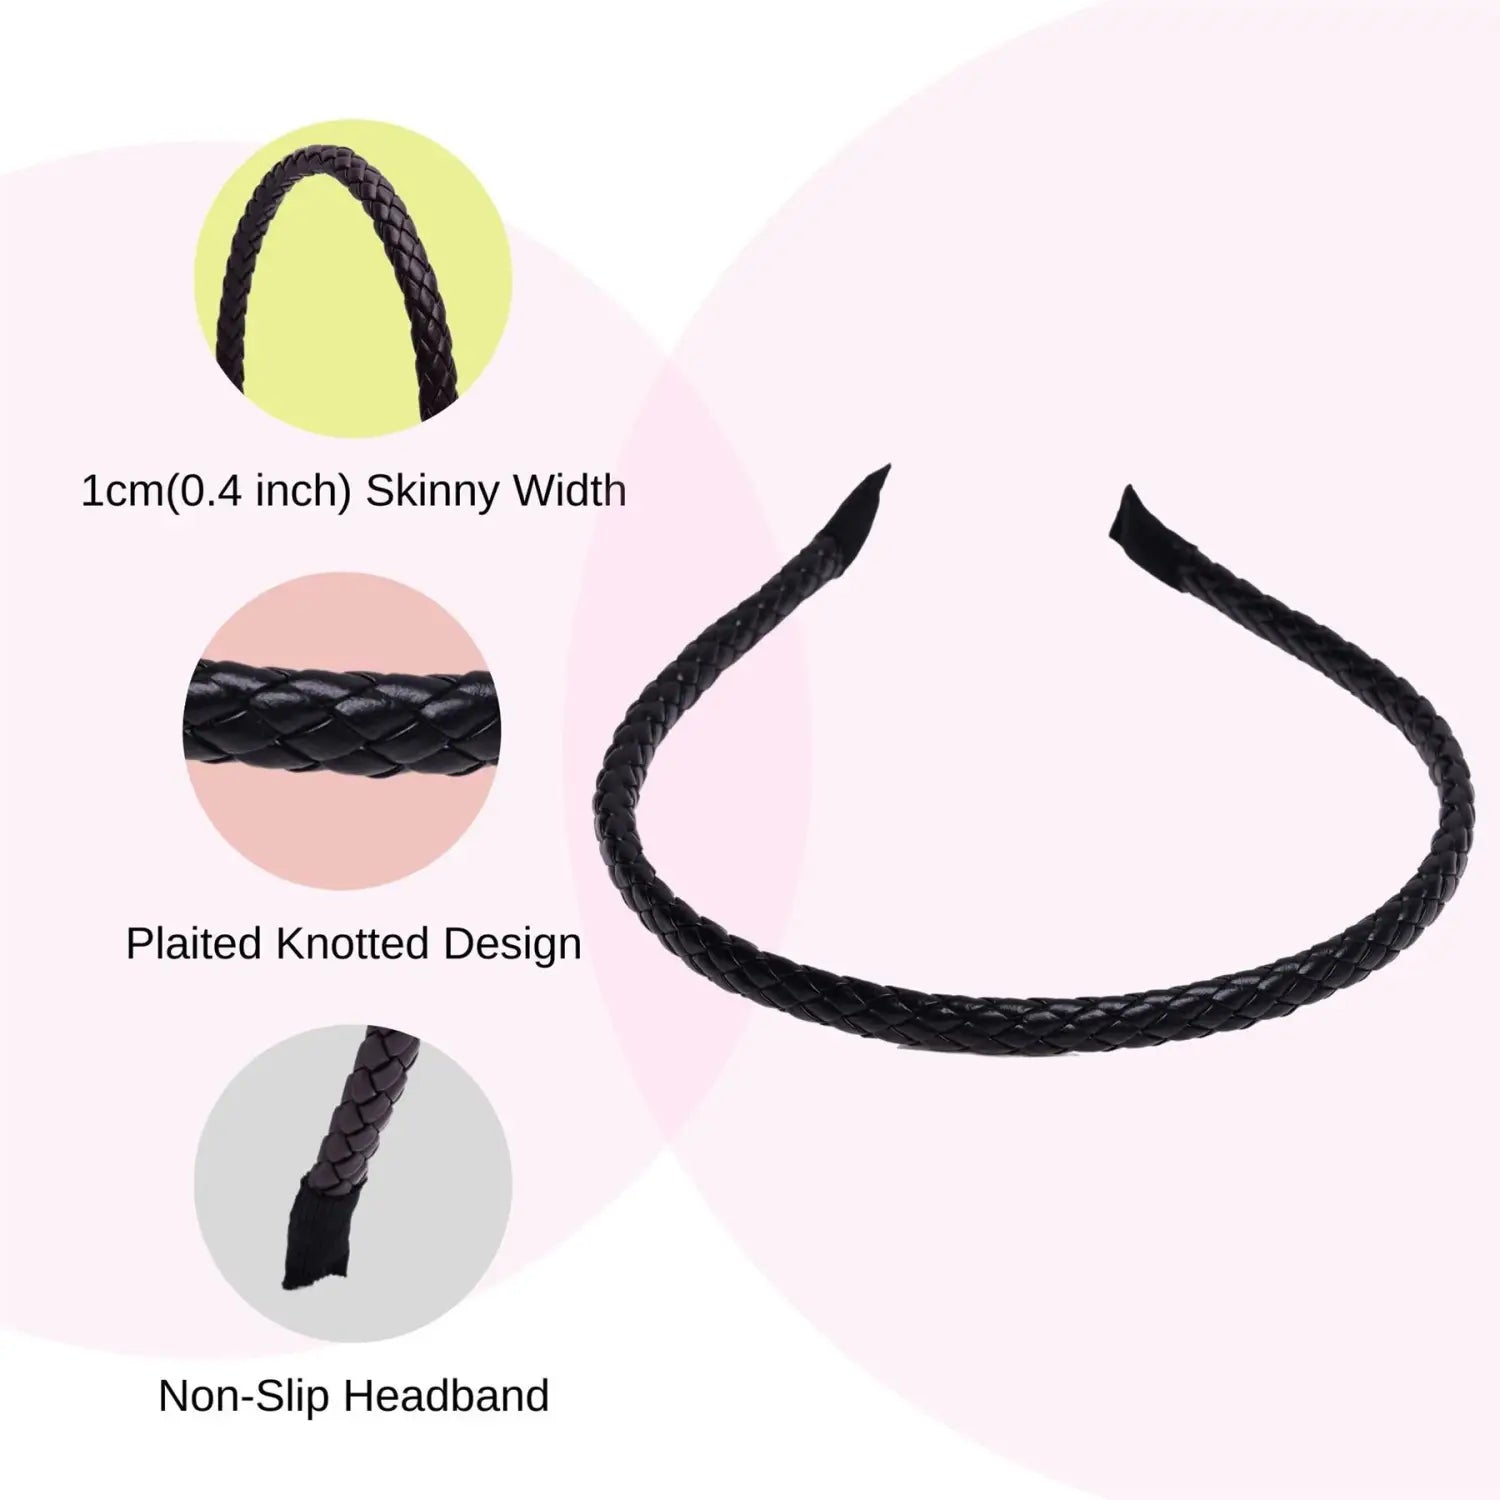 Braided PU leather skinny headbands - different types of braid hair diagram